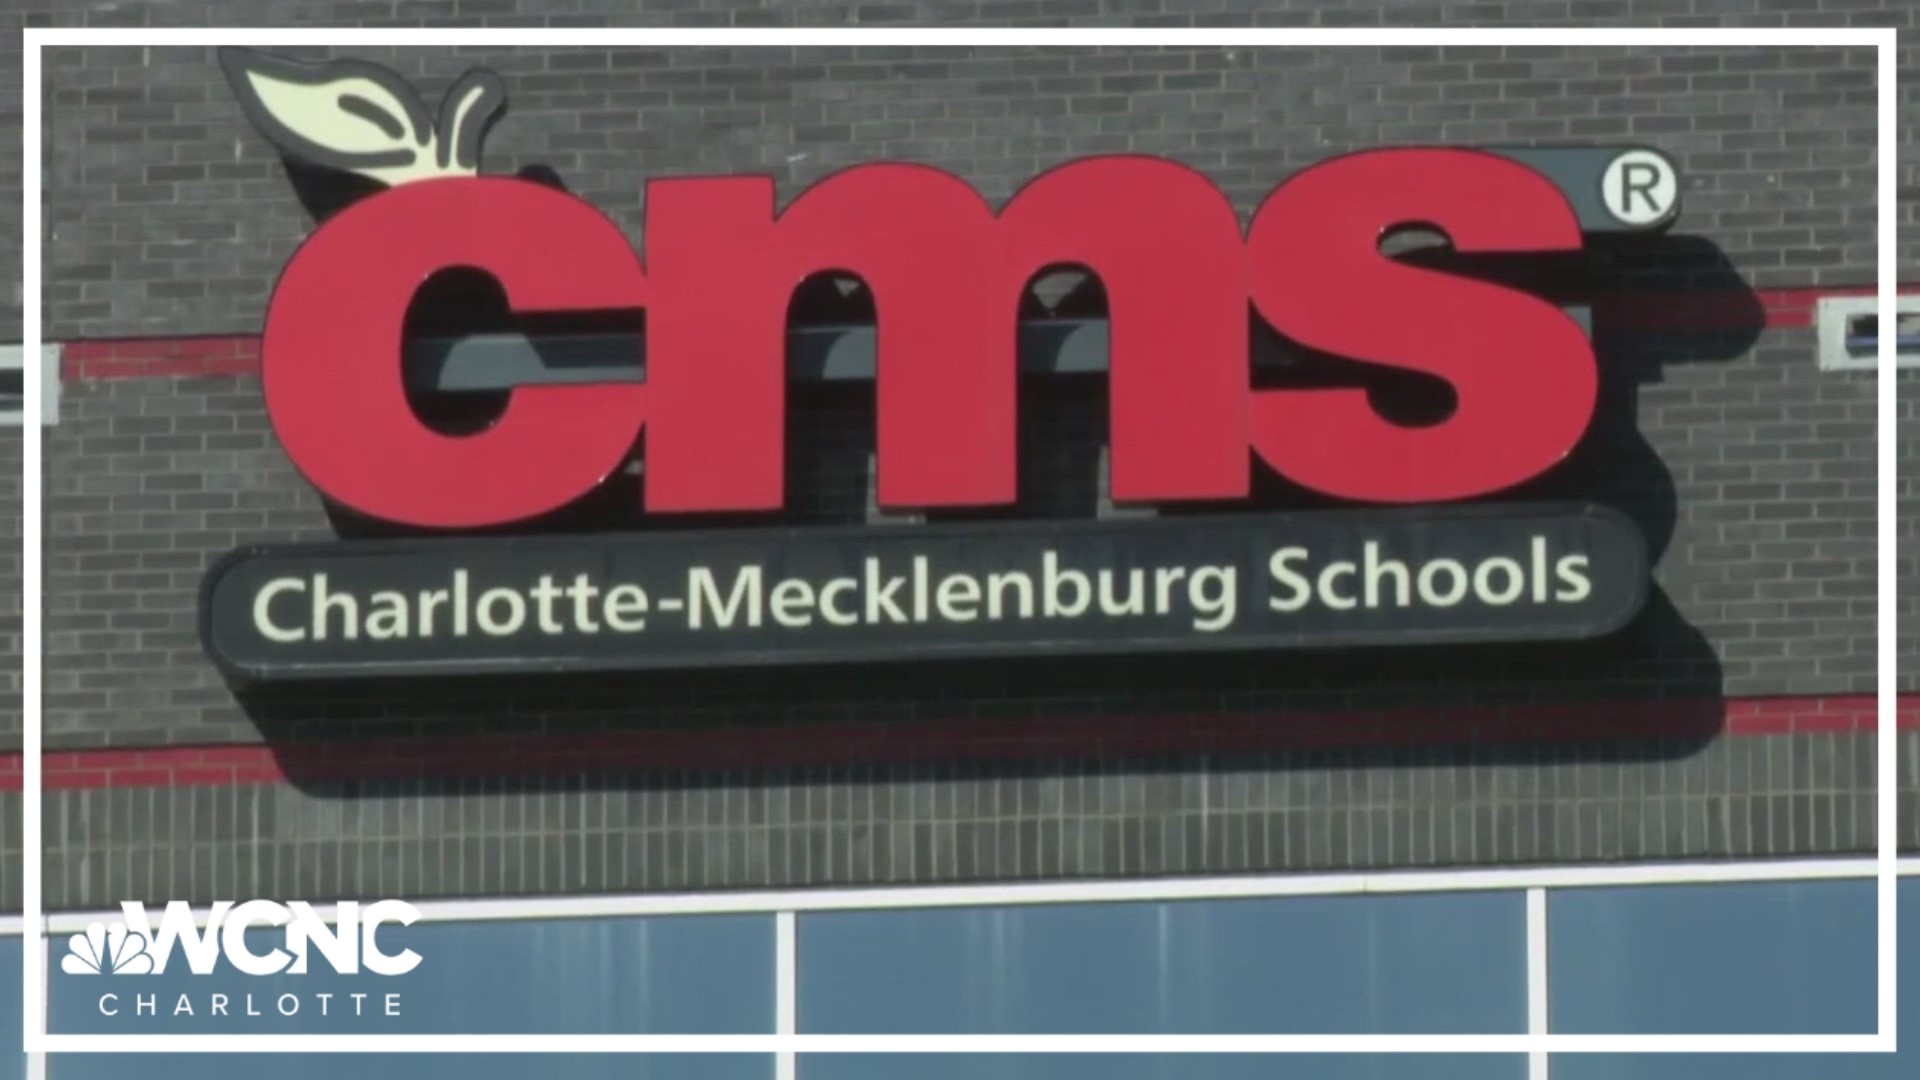 New data shows about half of CMS students are not performing at grade level.